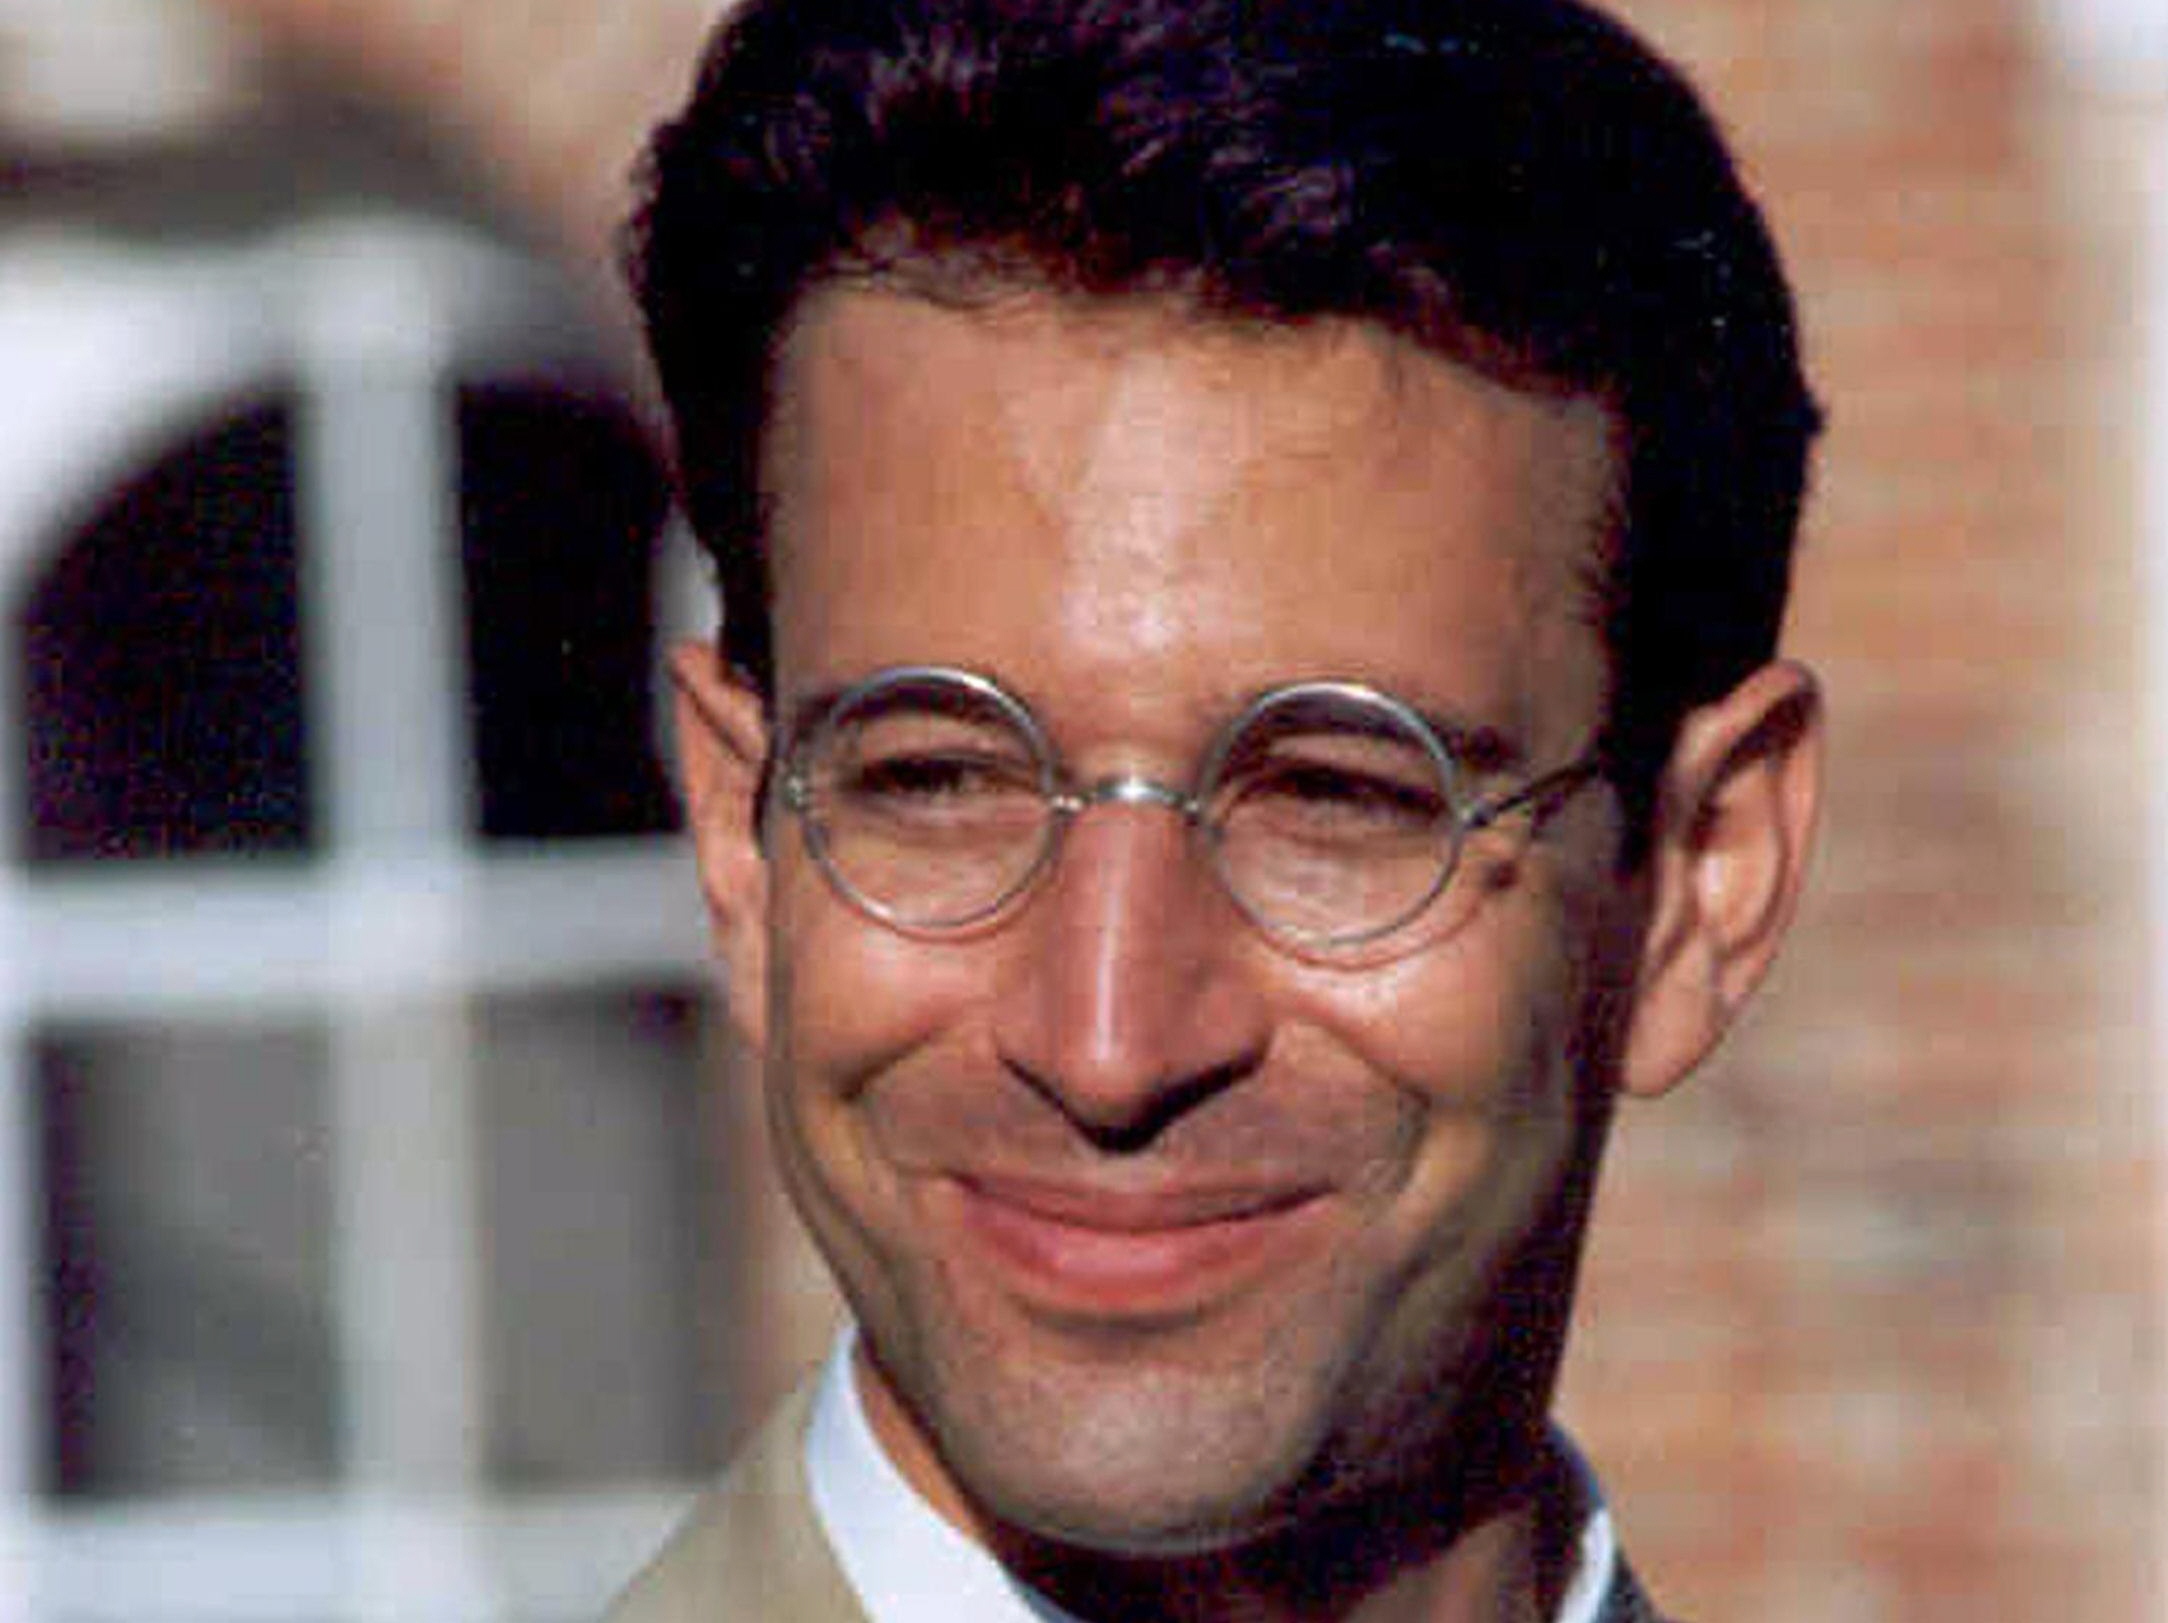 south asia bureau chief for the wall street journal daniel pearl was abducted in karachi in 2002 photo afp